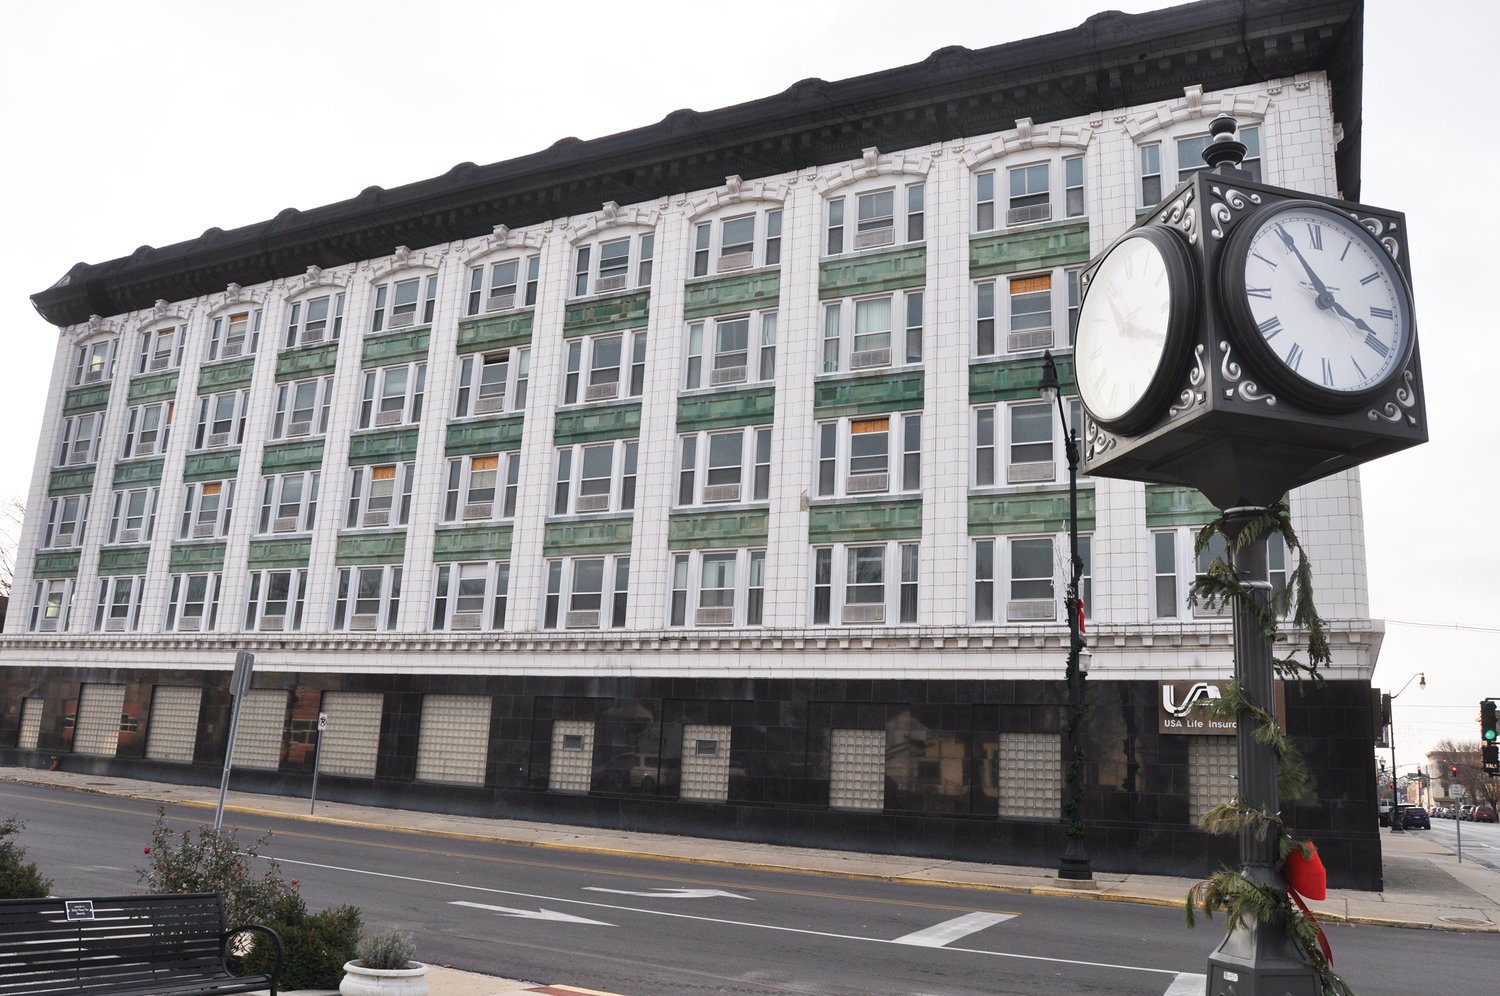 The Ben Hur Building, seen here Tuesday, is set to be renovated into a hotel and apartments.